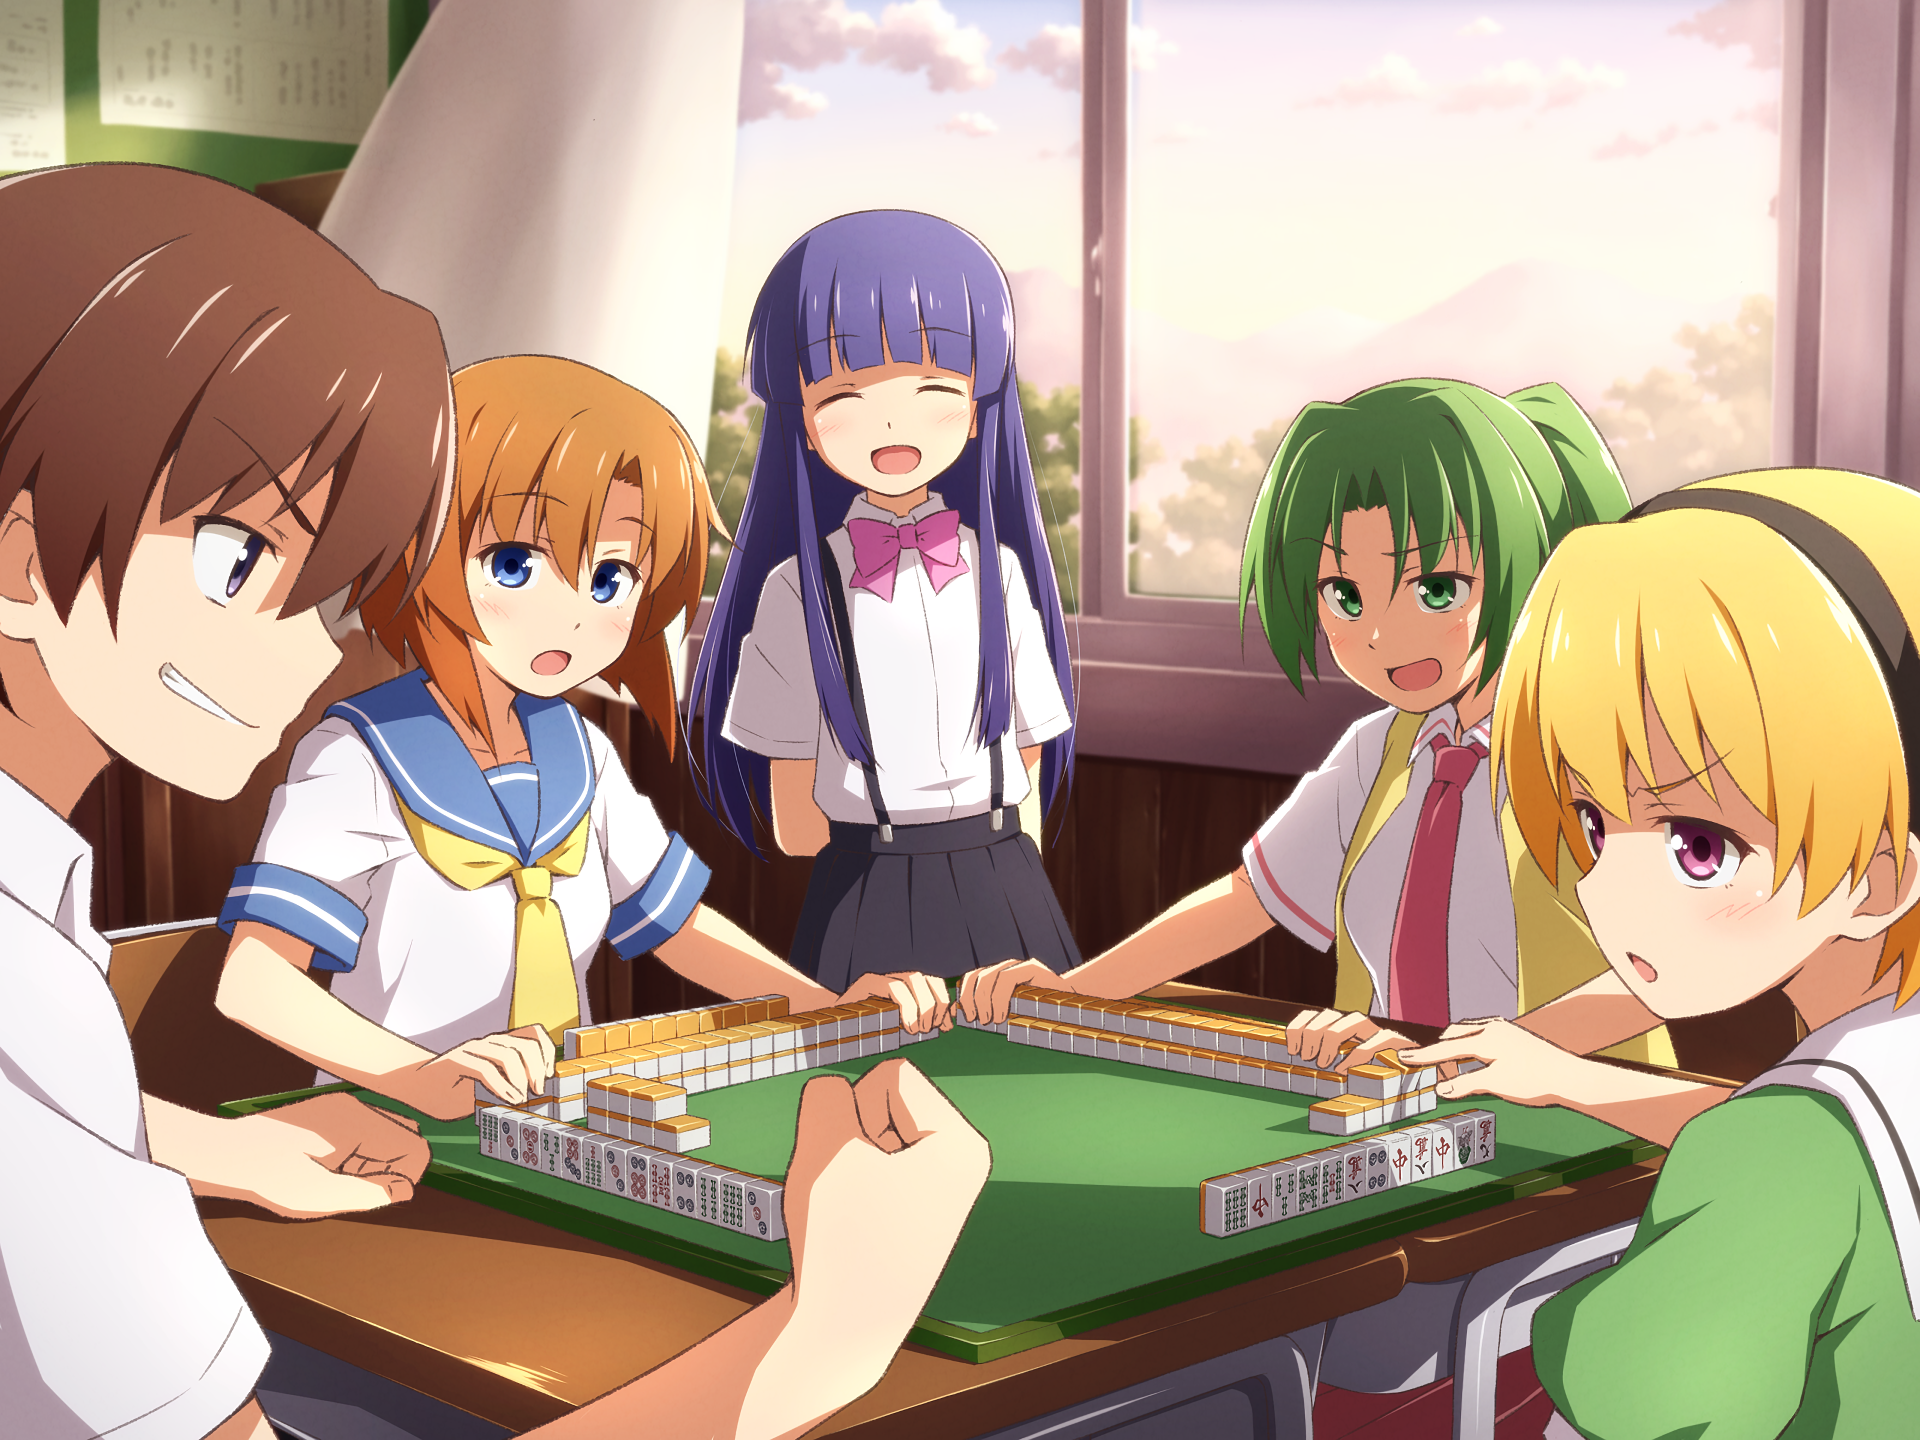 The Club playing mahjong by ymmryso